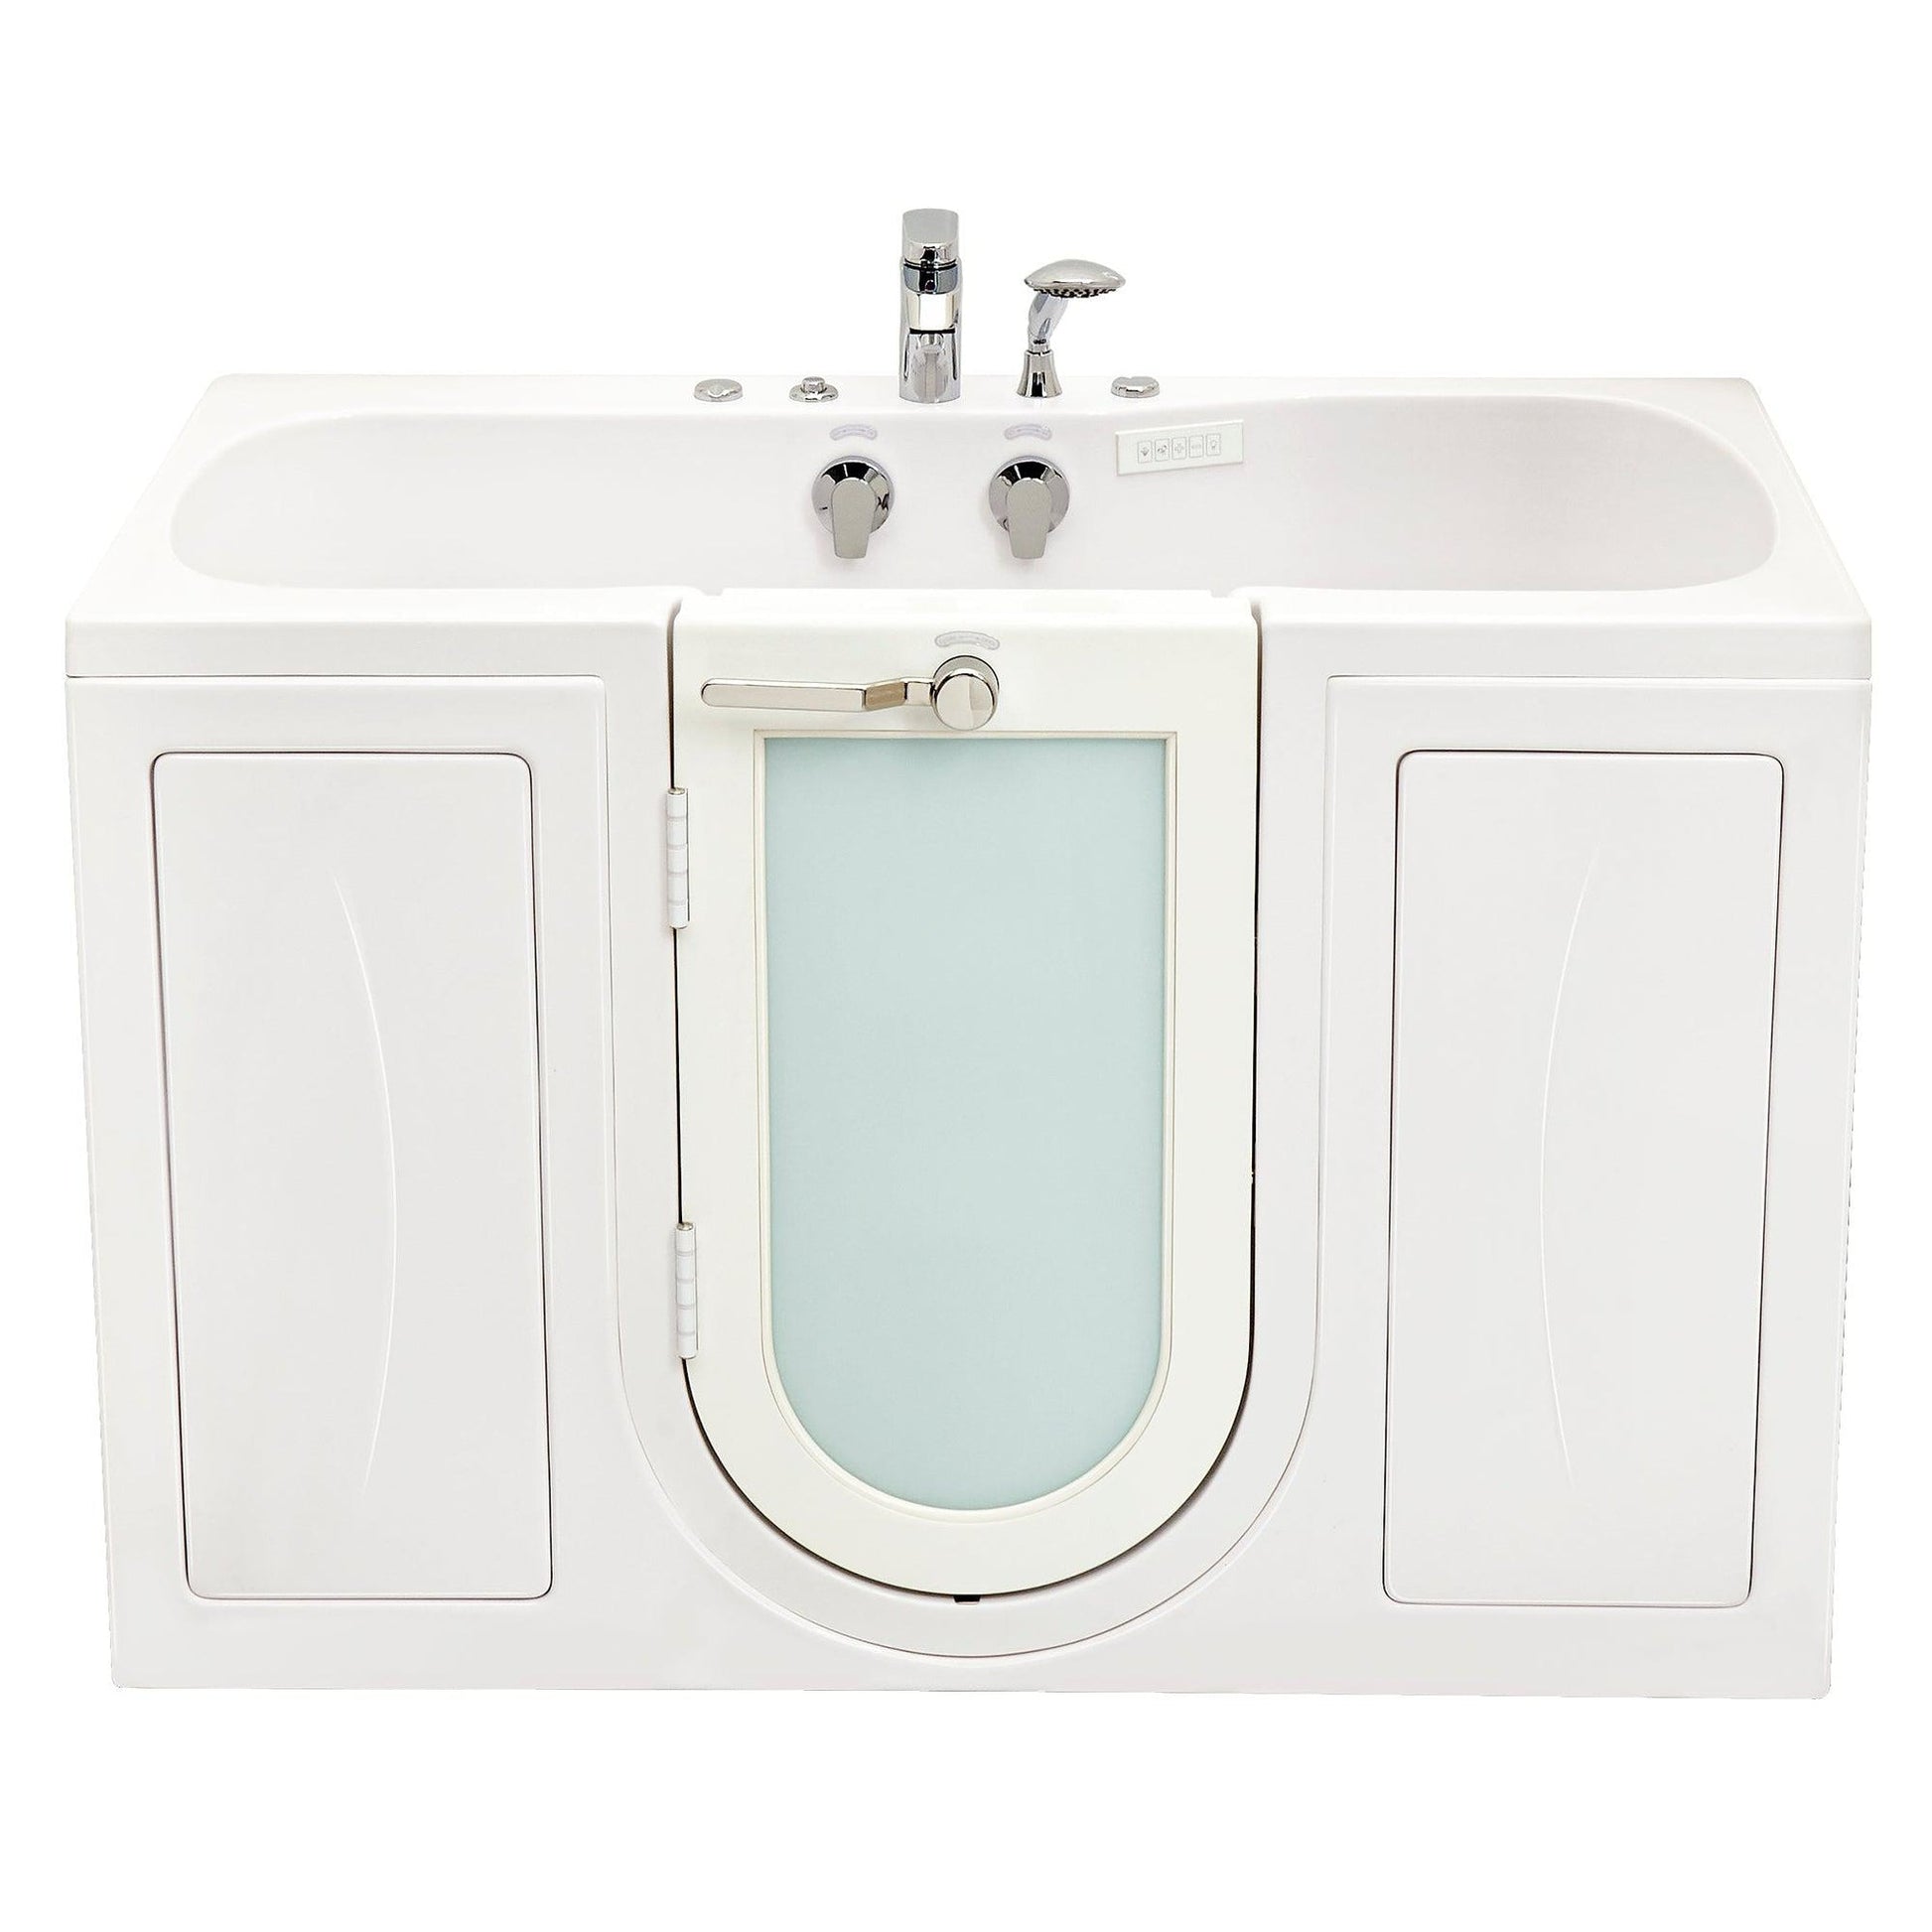 Ella Tub4Two 32 x 60 Hydro + Air Massage w/ Independent Foot Massage Acrylic Two Seat Walk in Tub Left Door